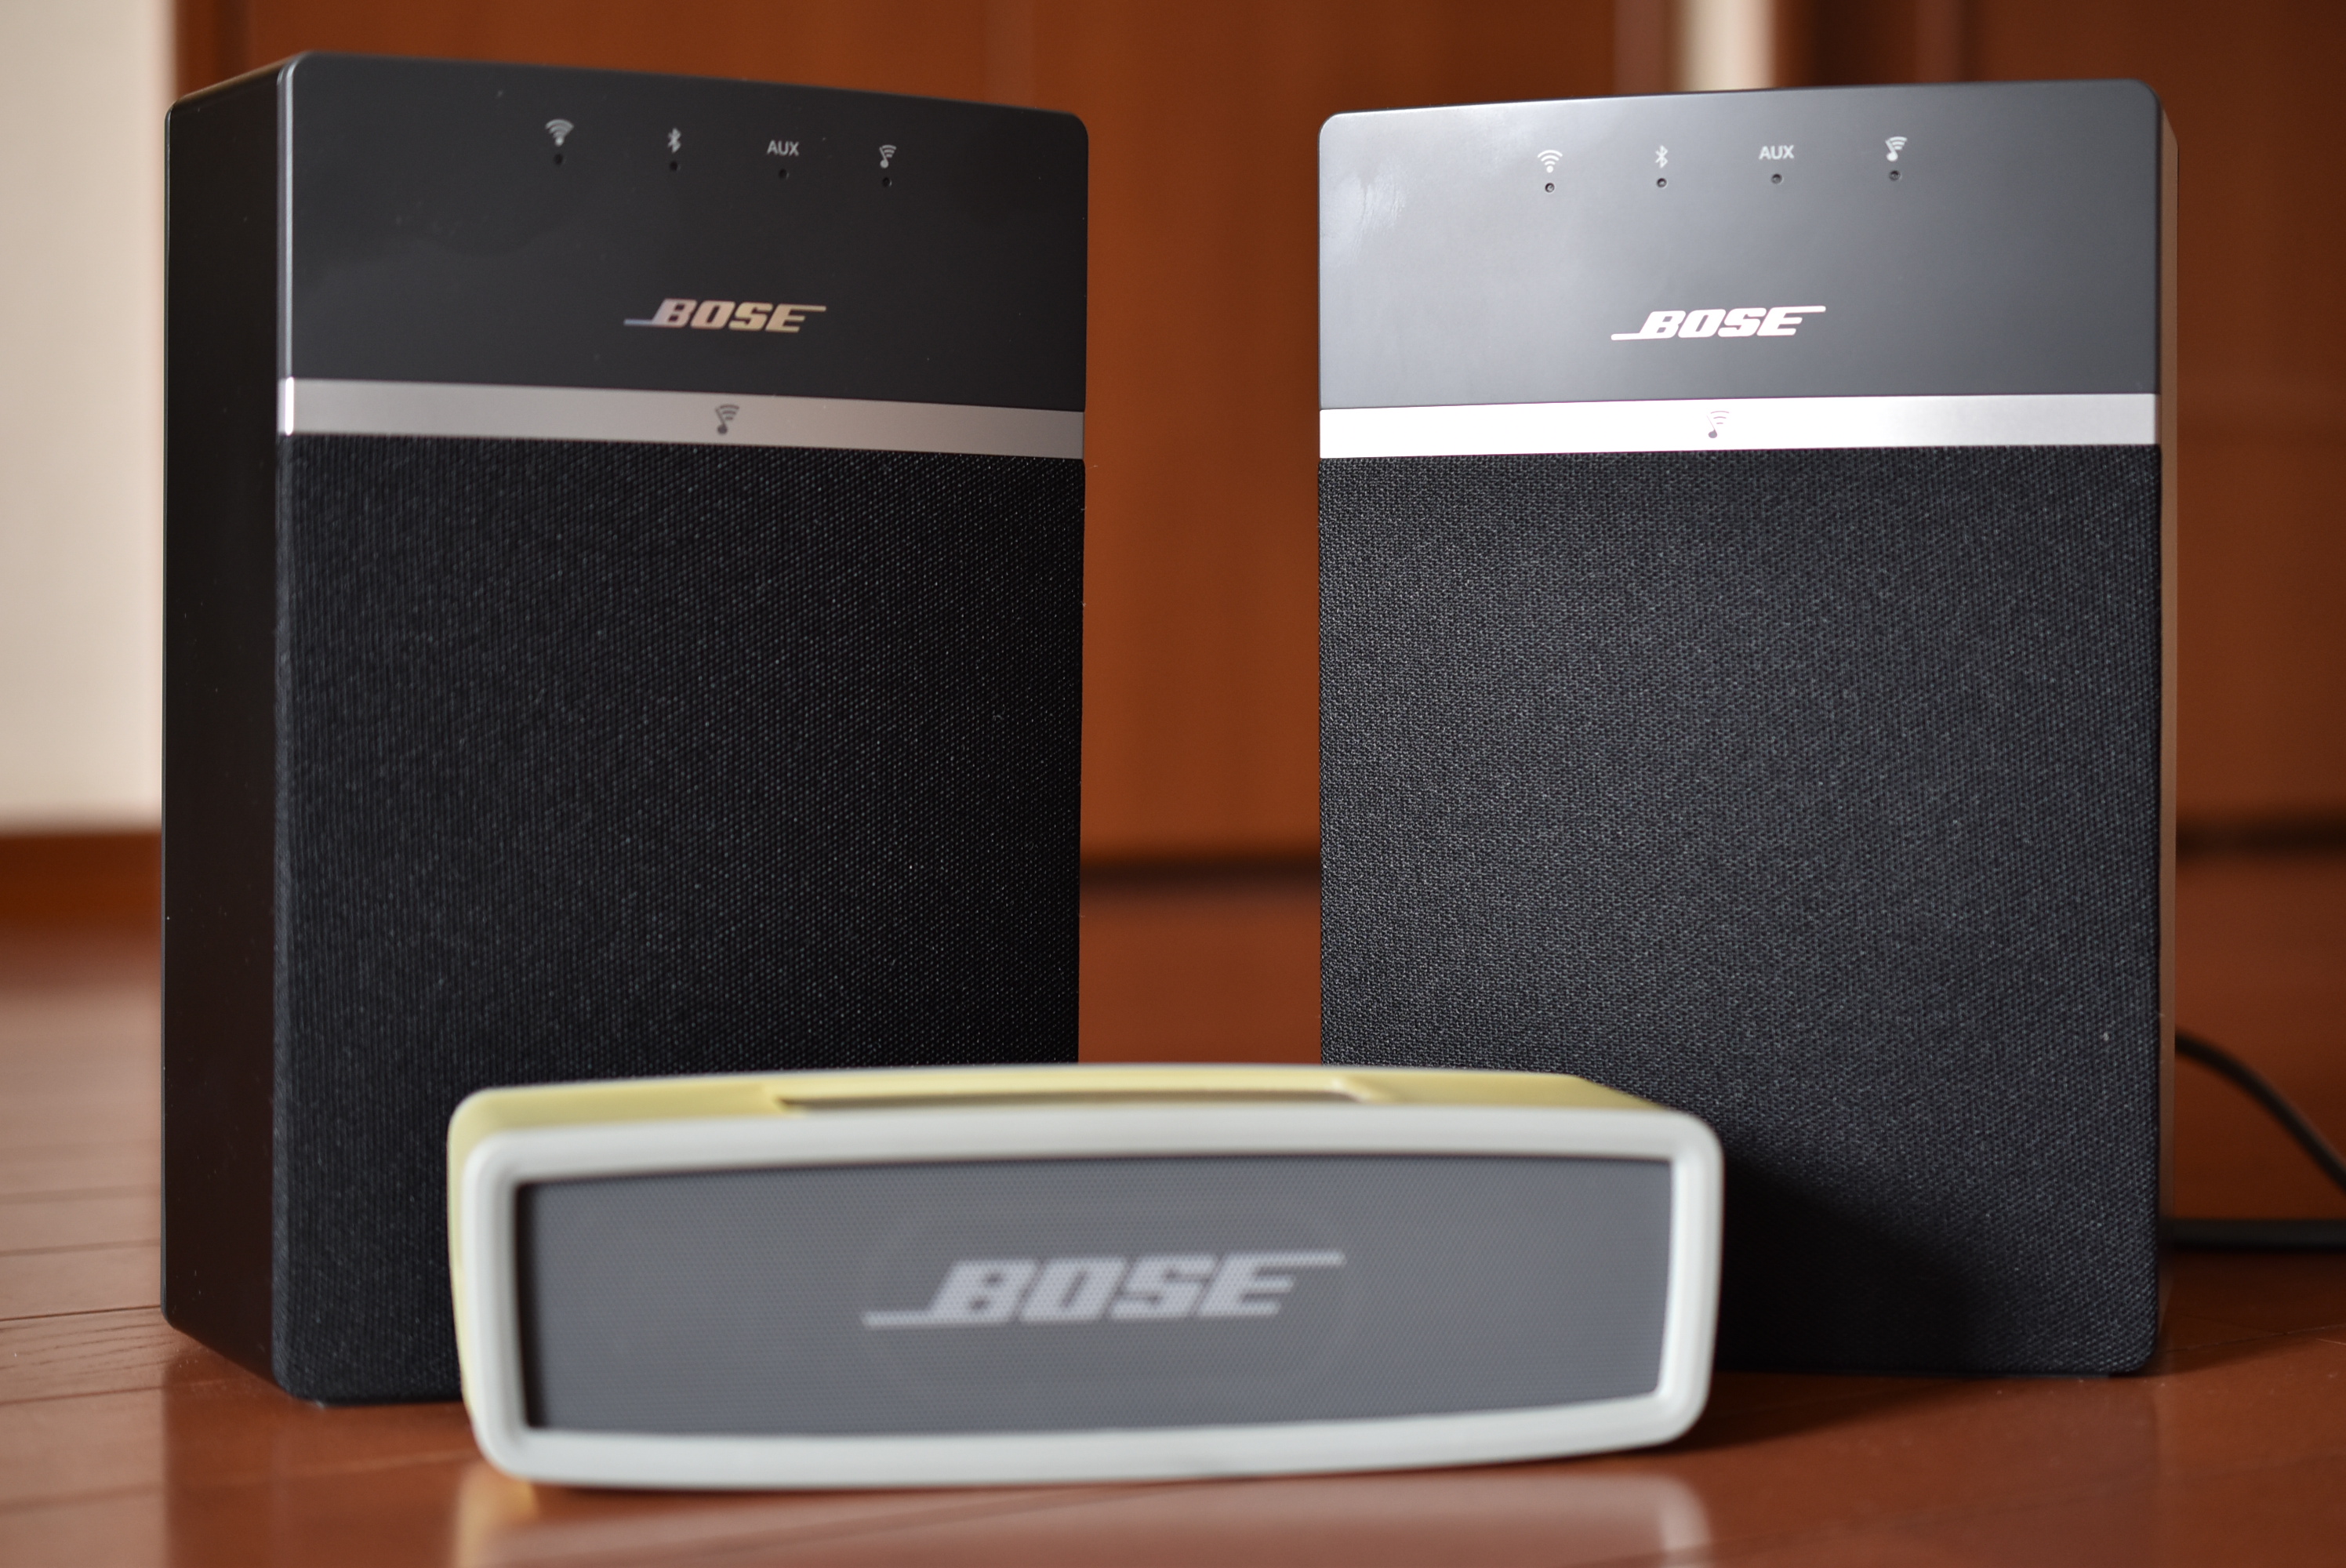 Bose SoundTouch 10 のステレオペア機能を試す！SoundTouch ってすごく 